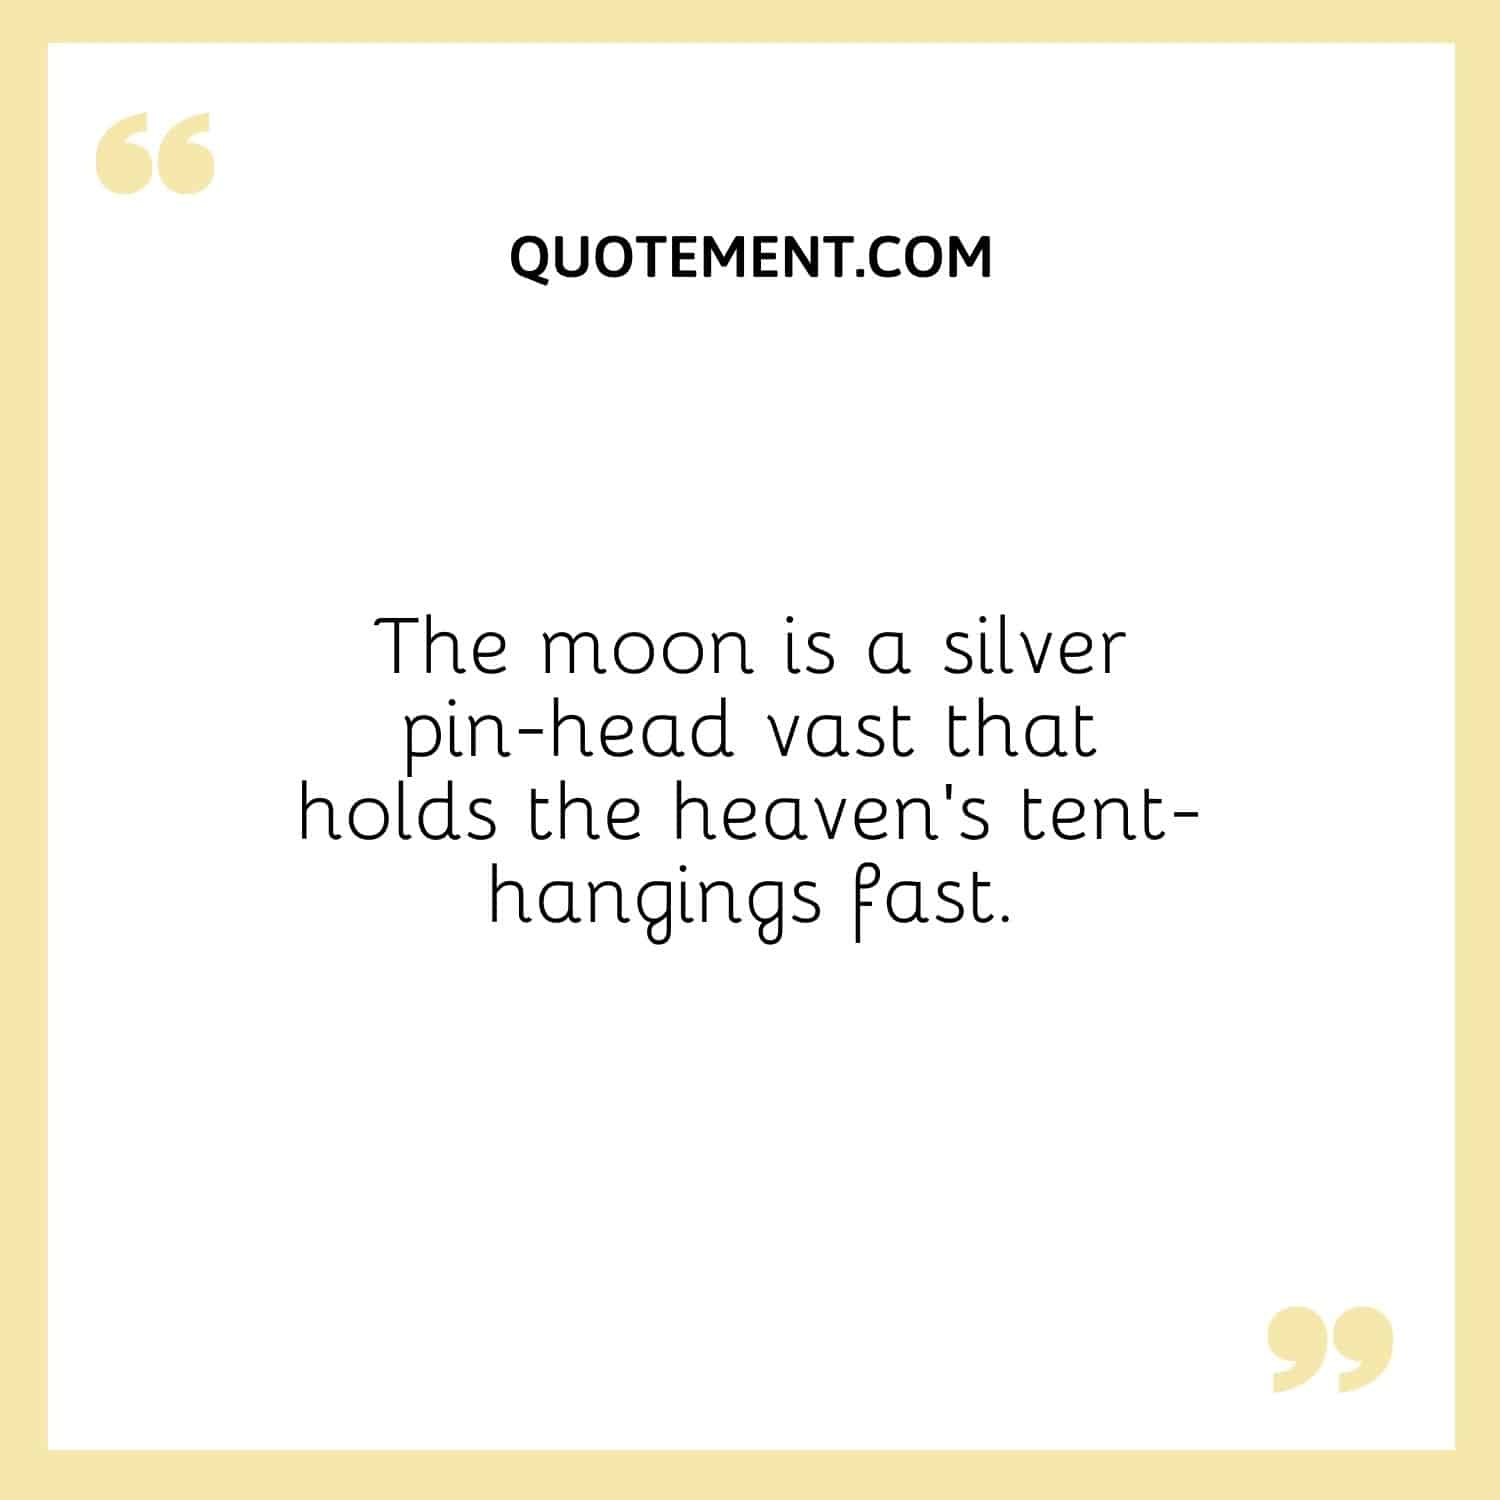 The moon is a silver pin-head vast that holds the heaven’s tent-hangings fast.